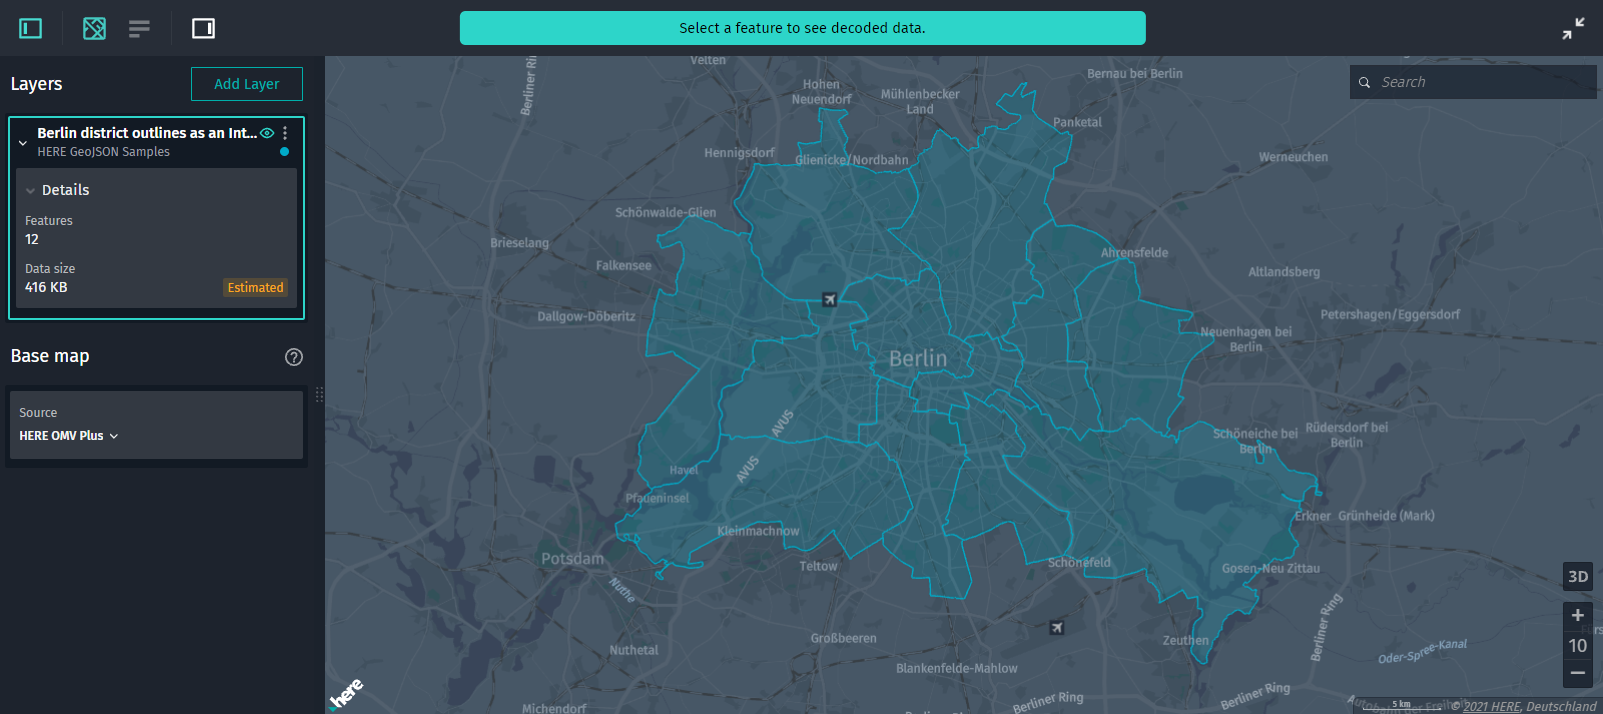 Visualization of Berlin districts